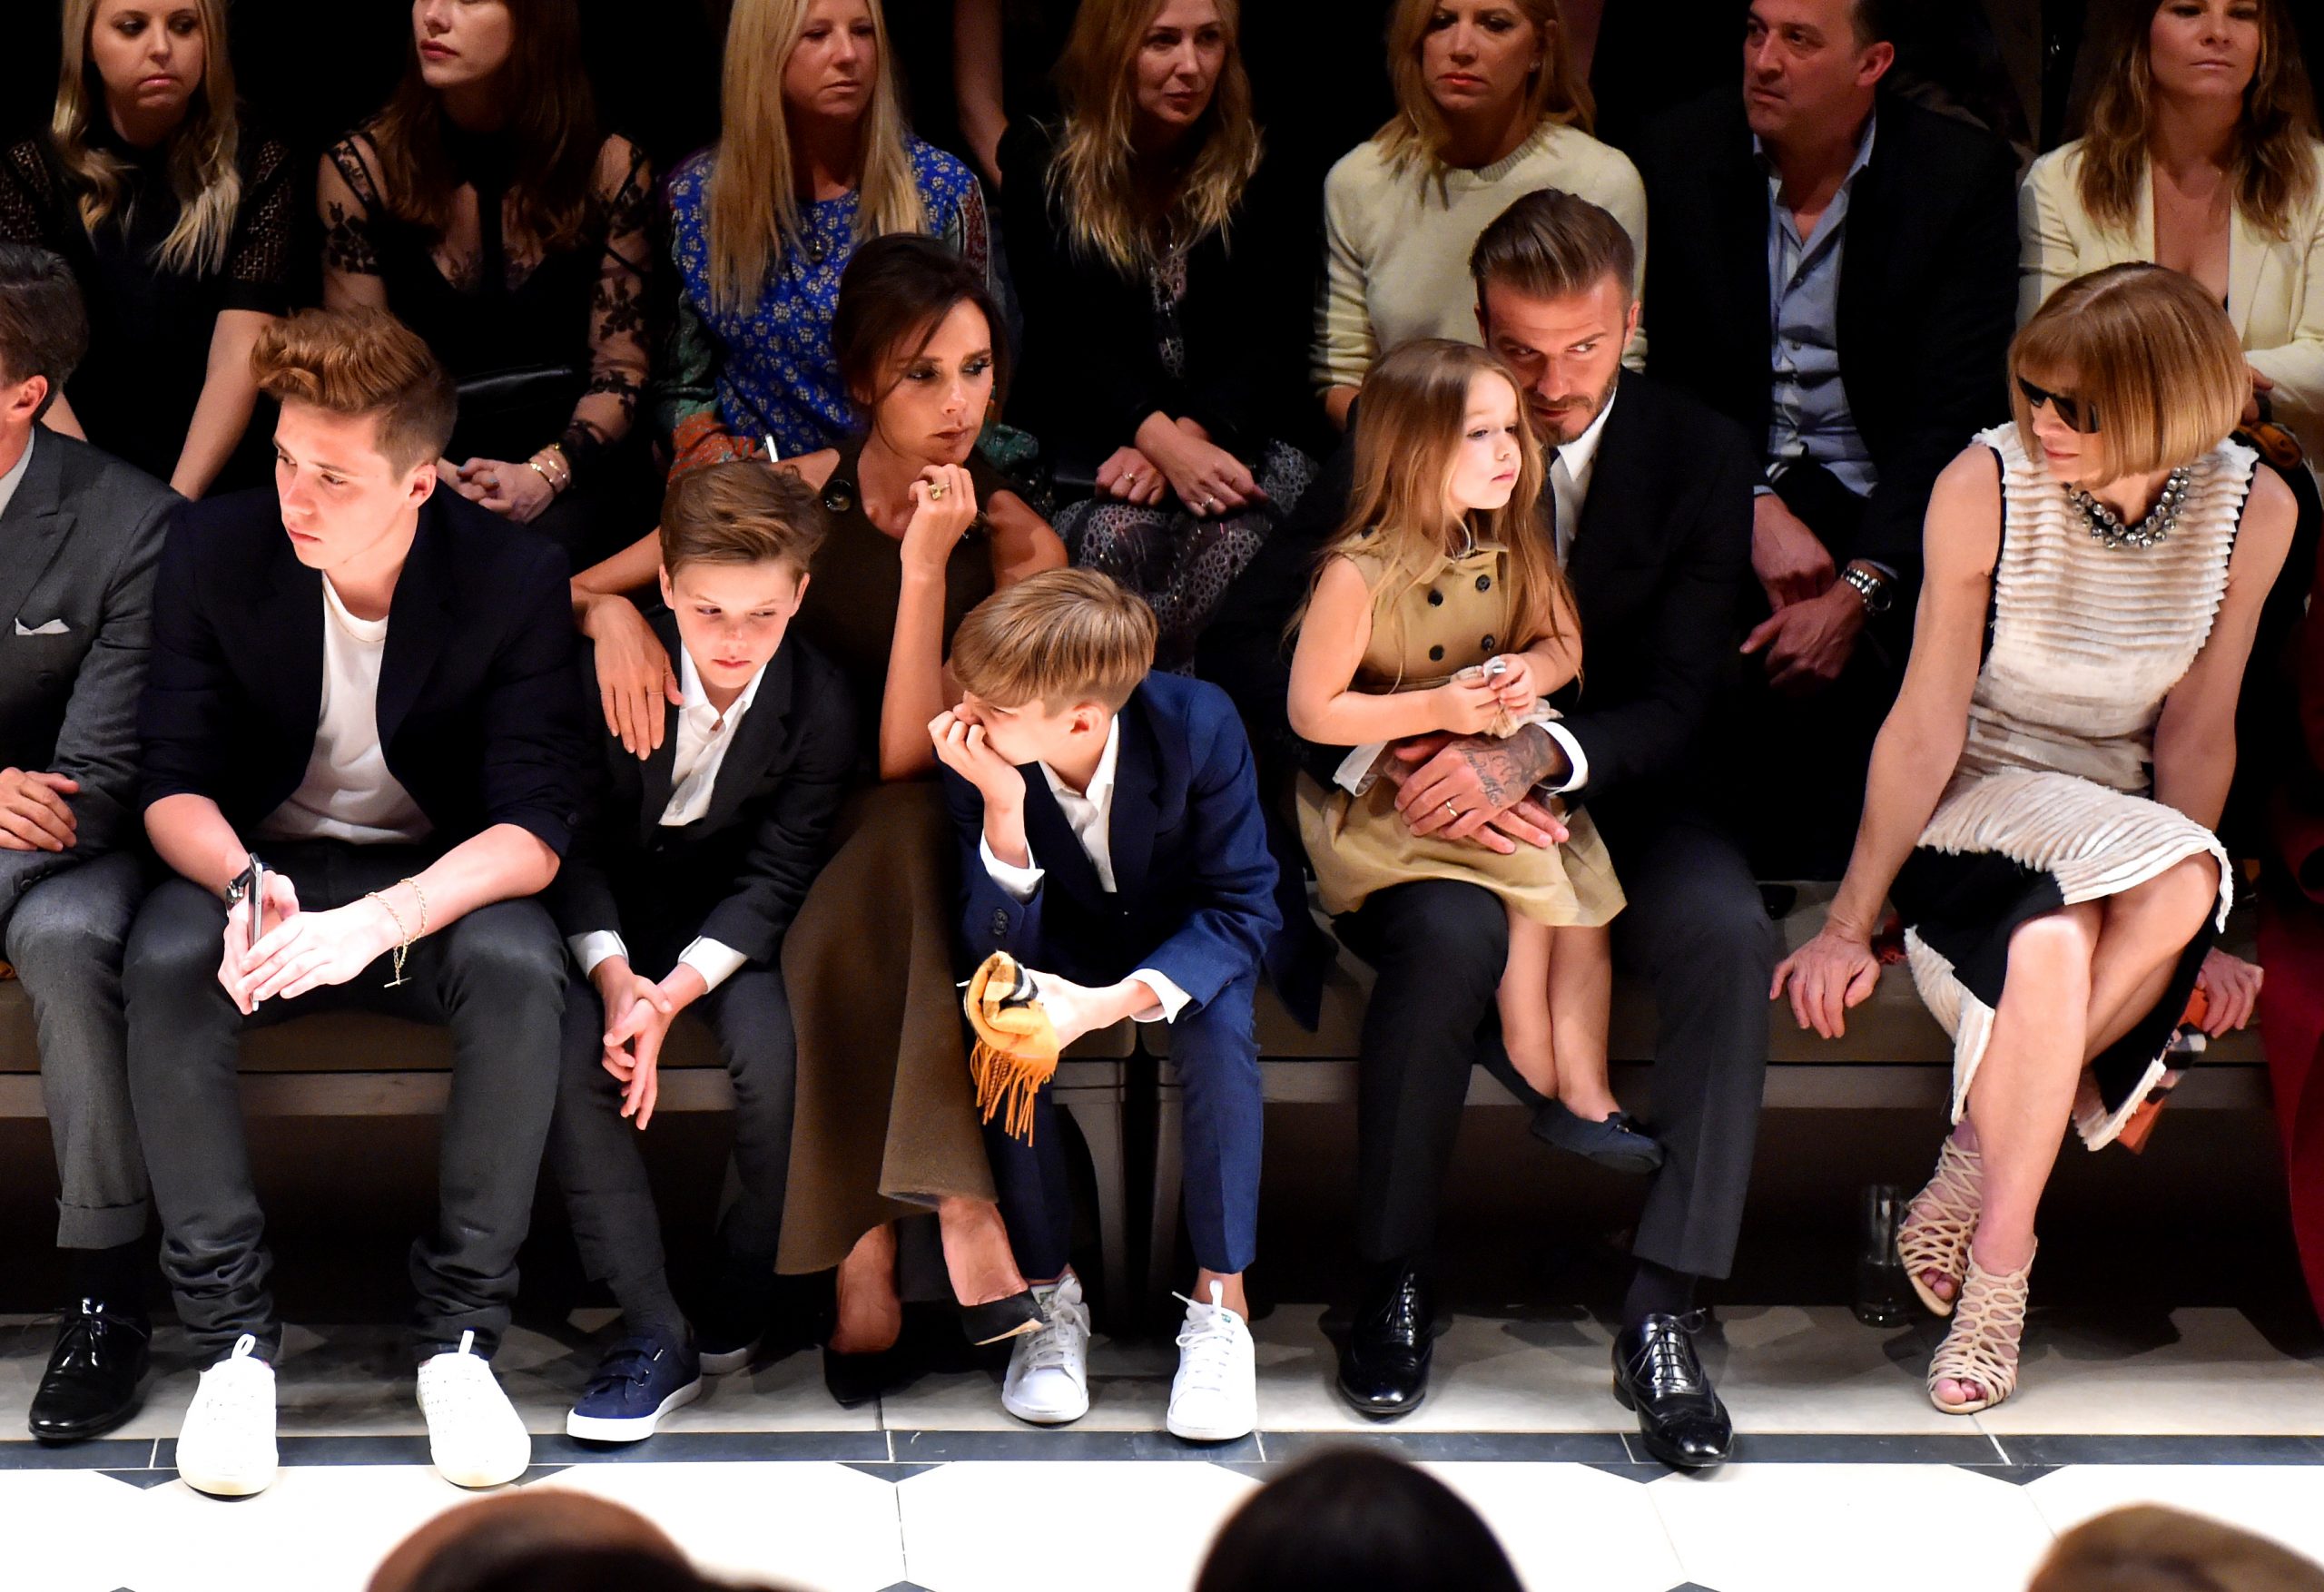 This Beckham is the richest of them all - and it may surprise you